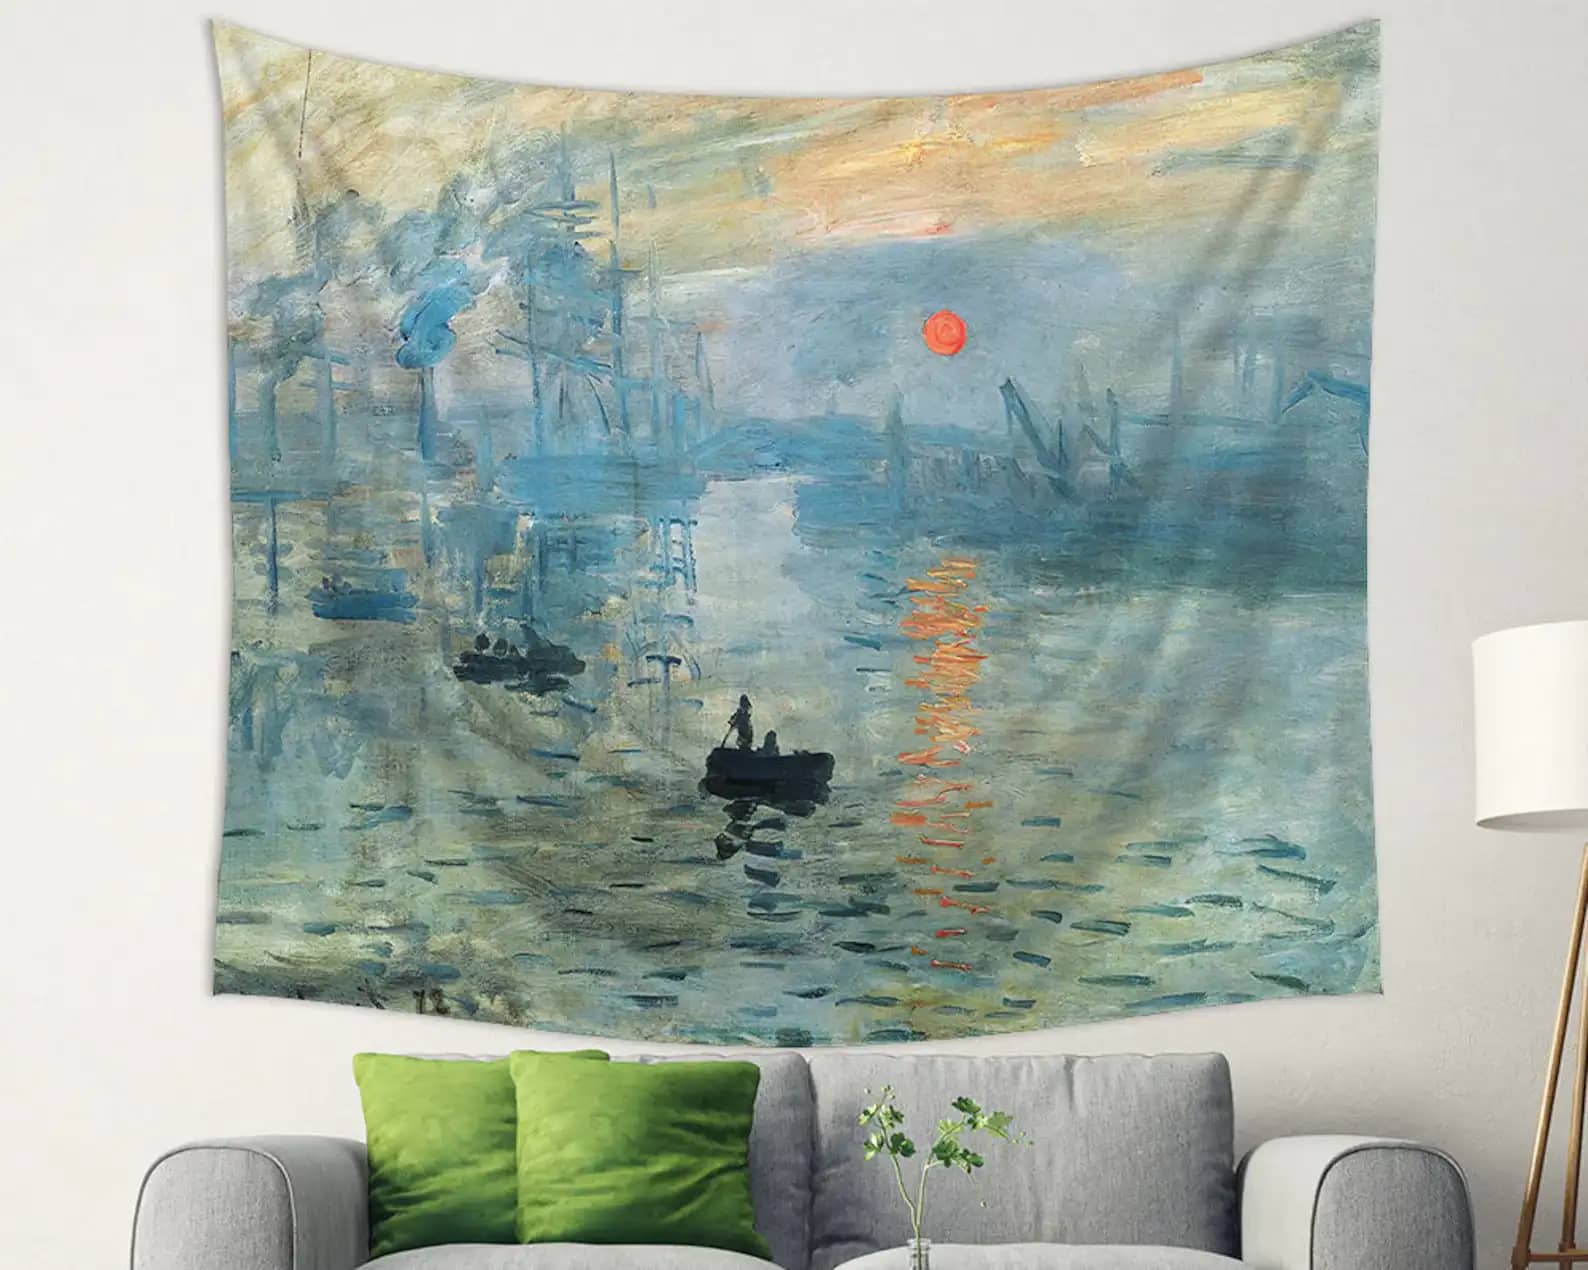 Every Sunset Brings The Promise Of A New Dawn Monet Fabric Backdrop Decor Tapestry